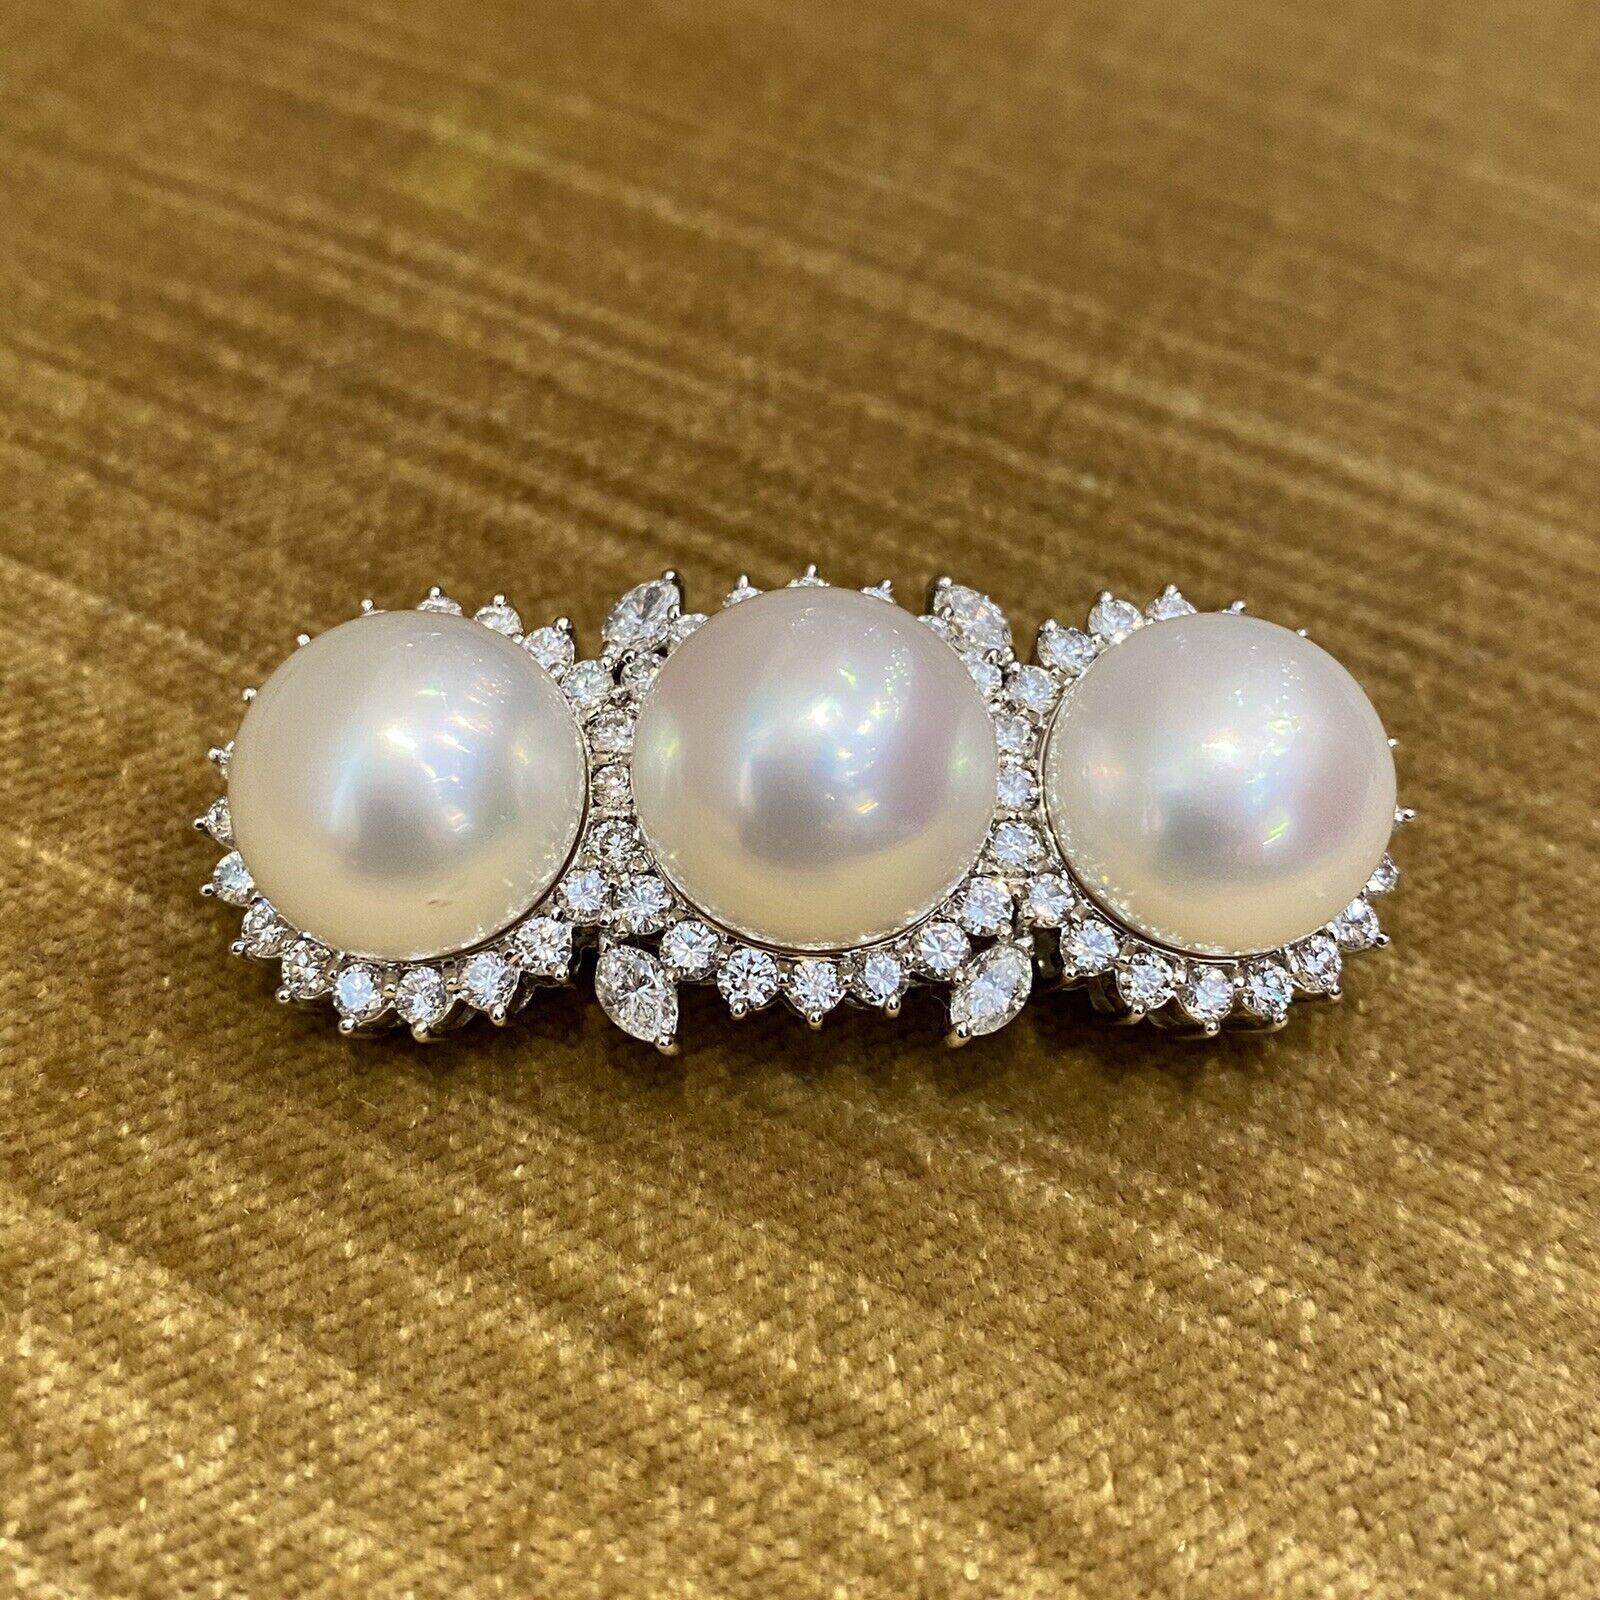 South Sea Pearl and Diamond Bar Brooch Pin in Platinum

Triple Pearl and Diamond Pin features three white South Sea Pearls, each 14.5mm in size with minor blemishes, surrounded by Round Brilliant Diamonds and Marquise Diamond accents set in